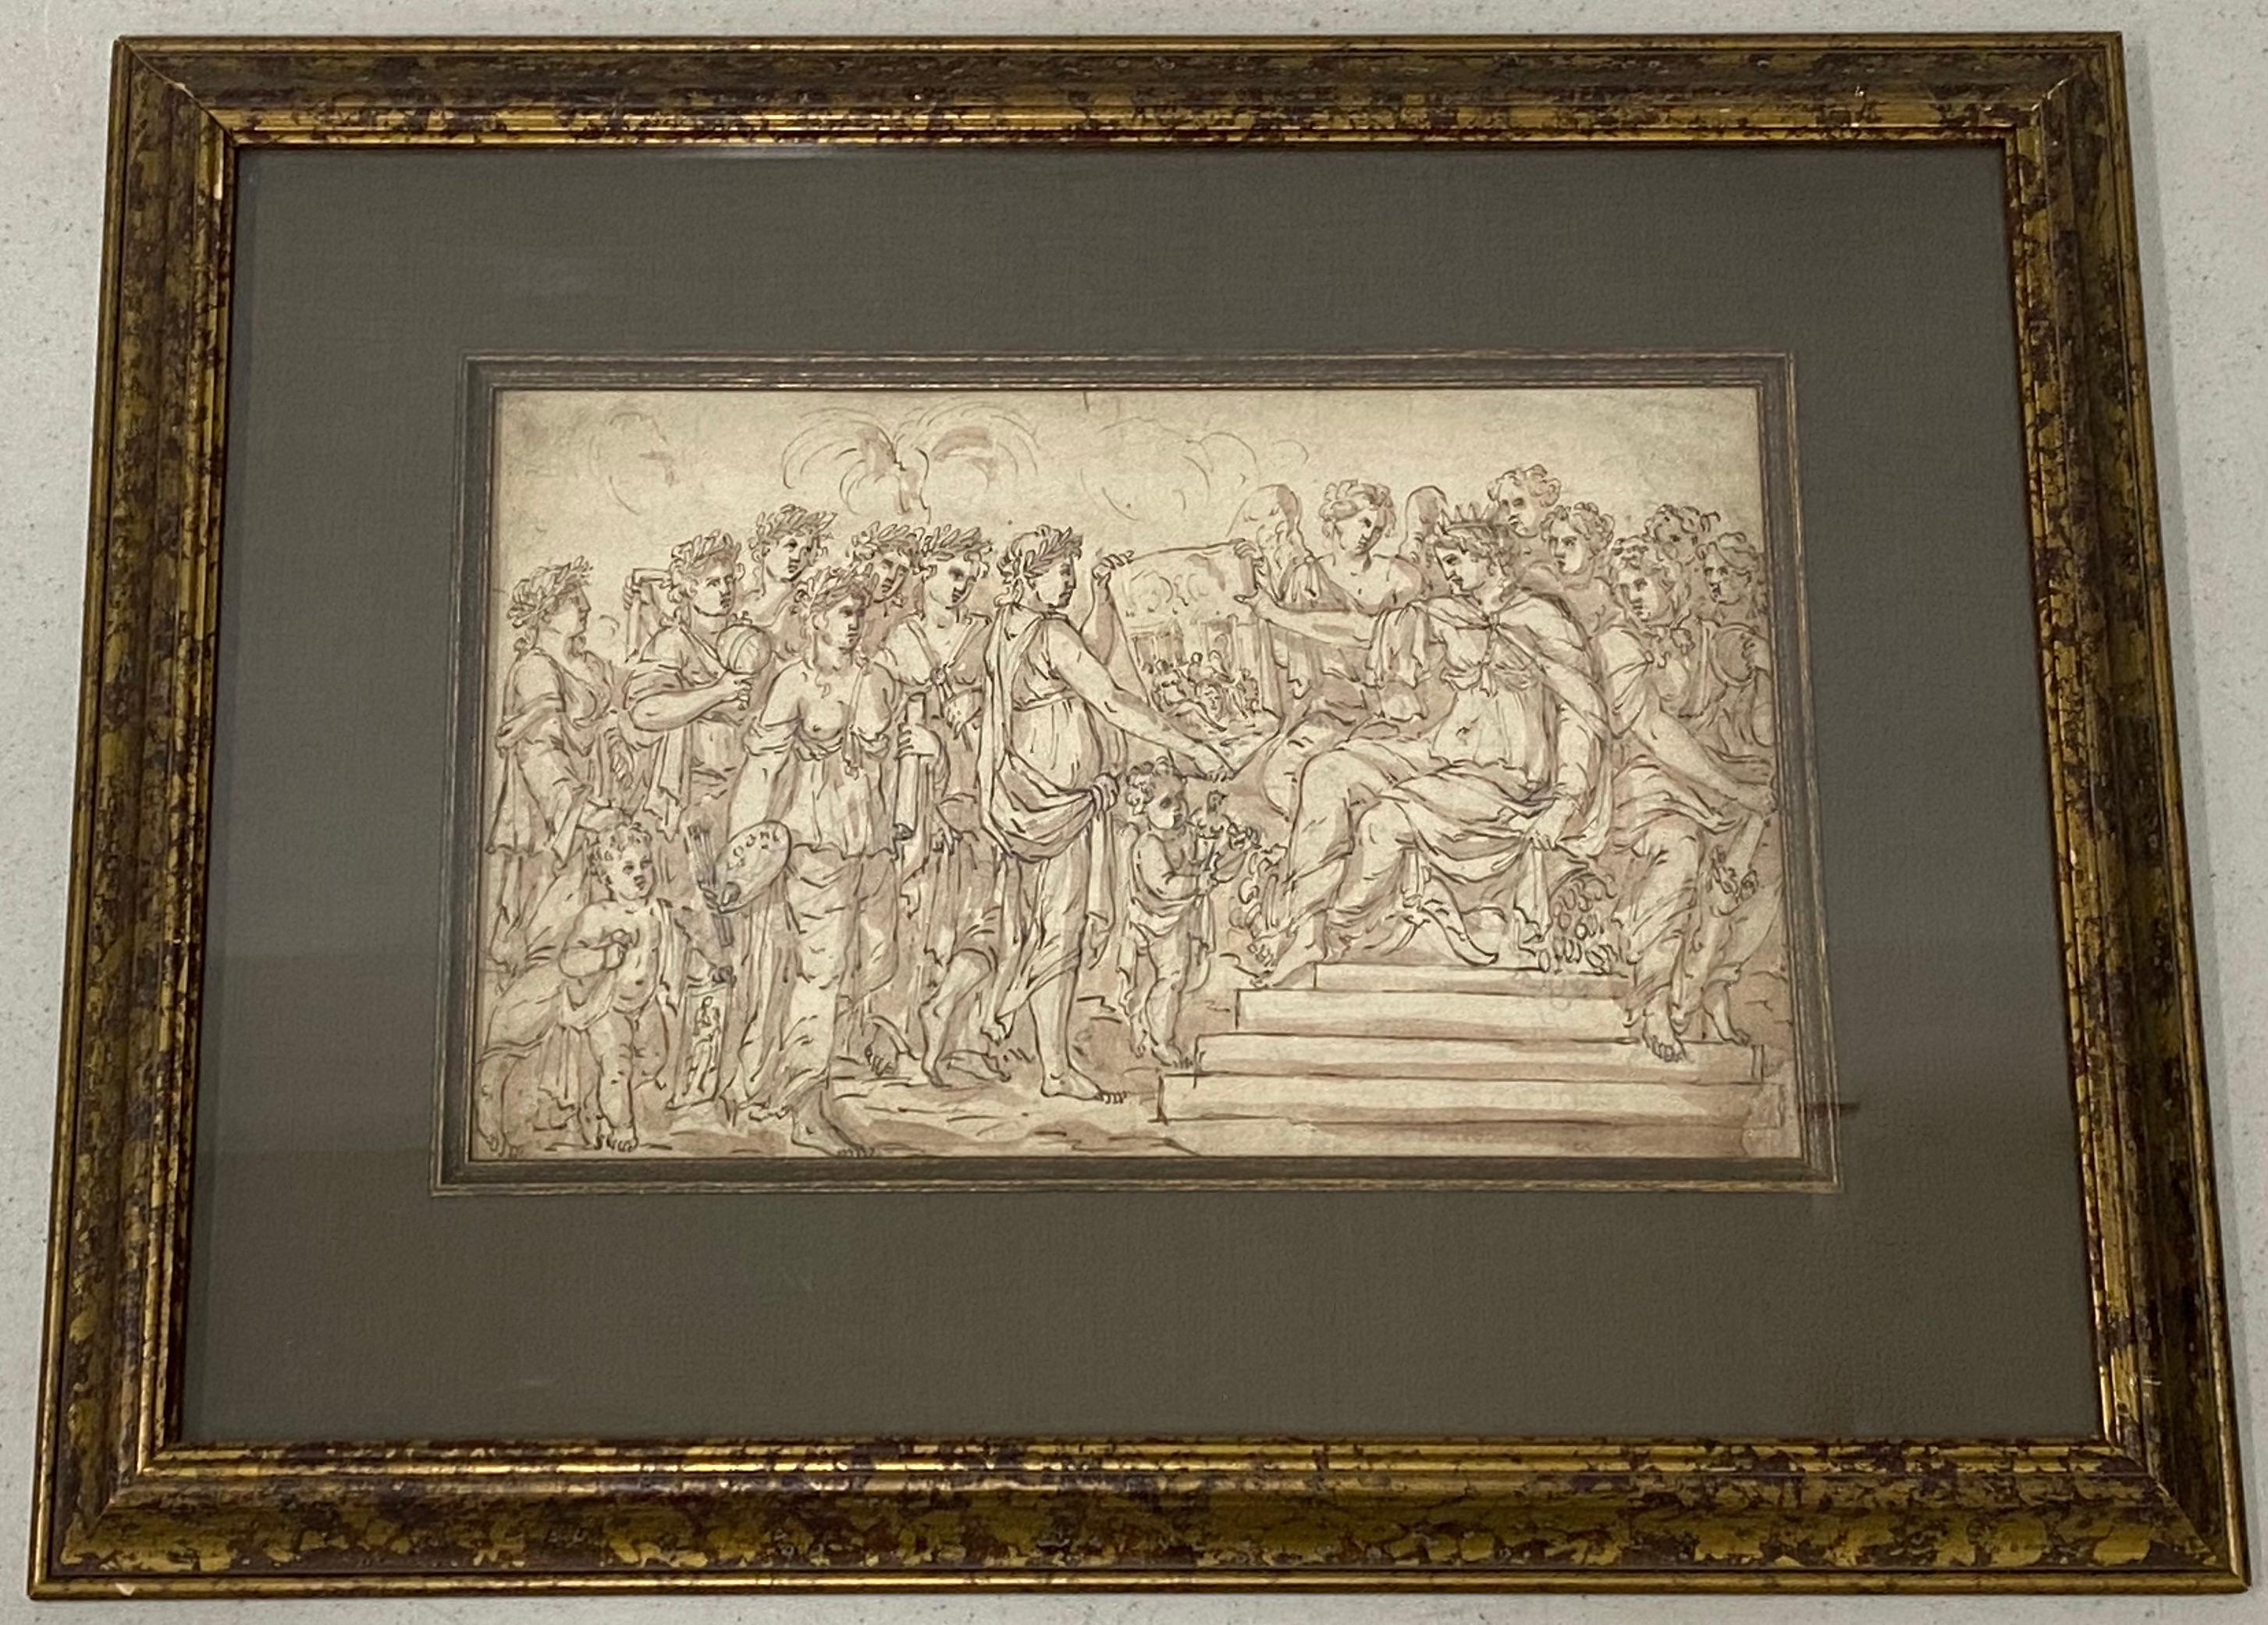 Unknown Figurative Art - 18th to 19th Century "Art Presentation" Old Master Drawing